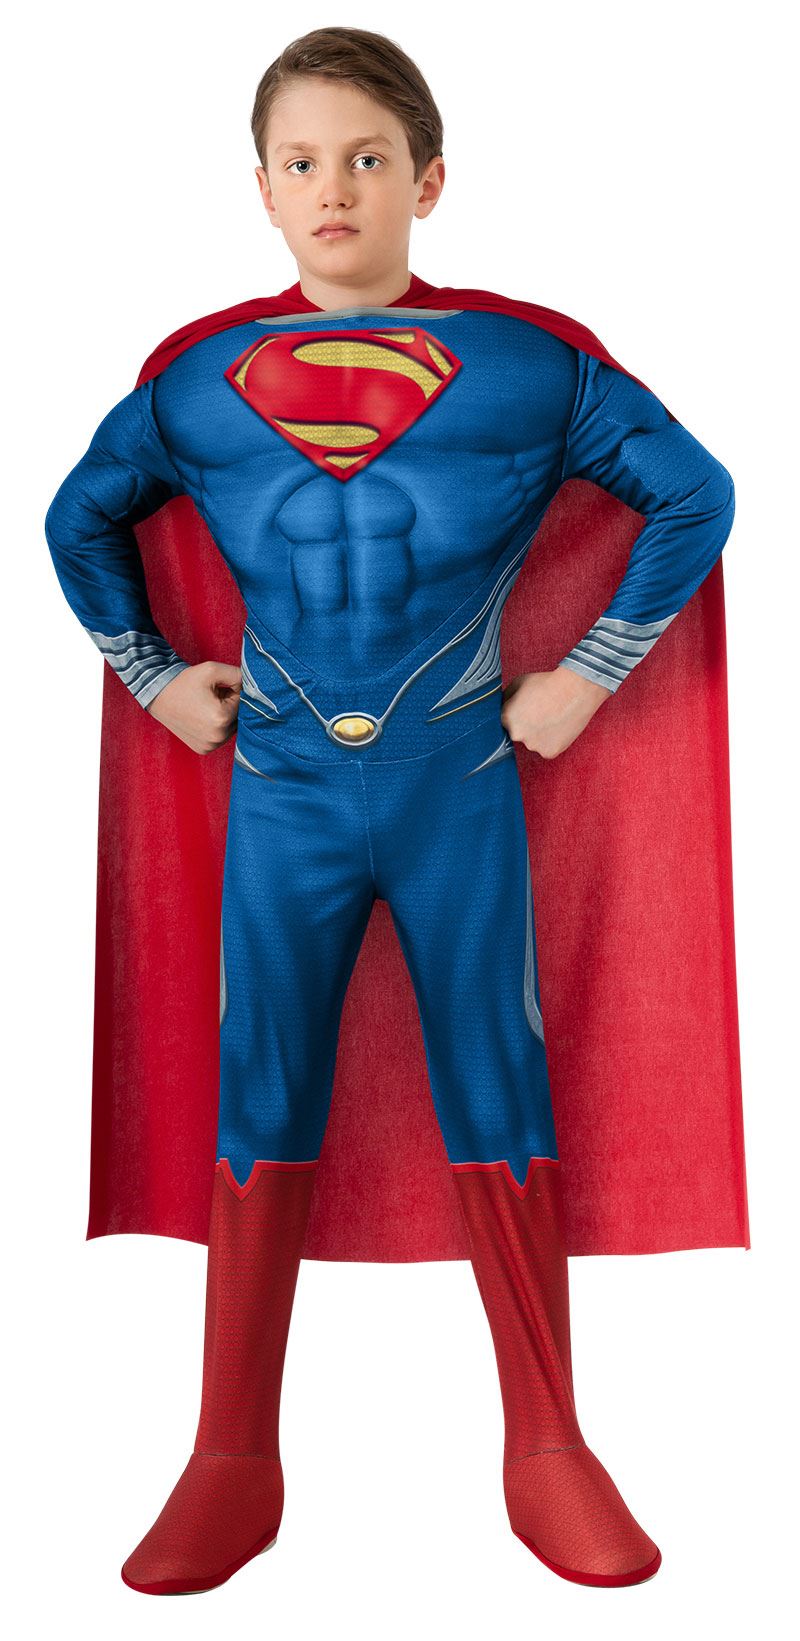 Super Man Boys Muscle Man Of Steel Costume by Rubies only at  TeeJayTraders.com